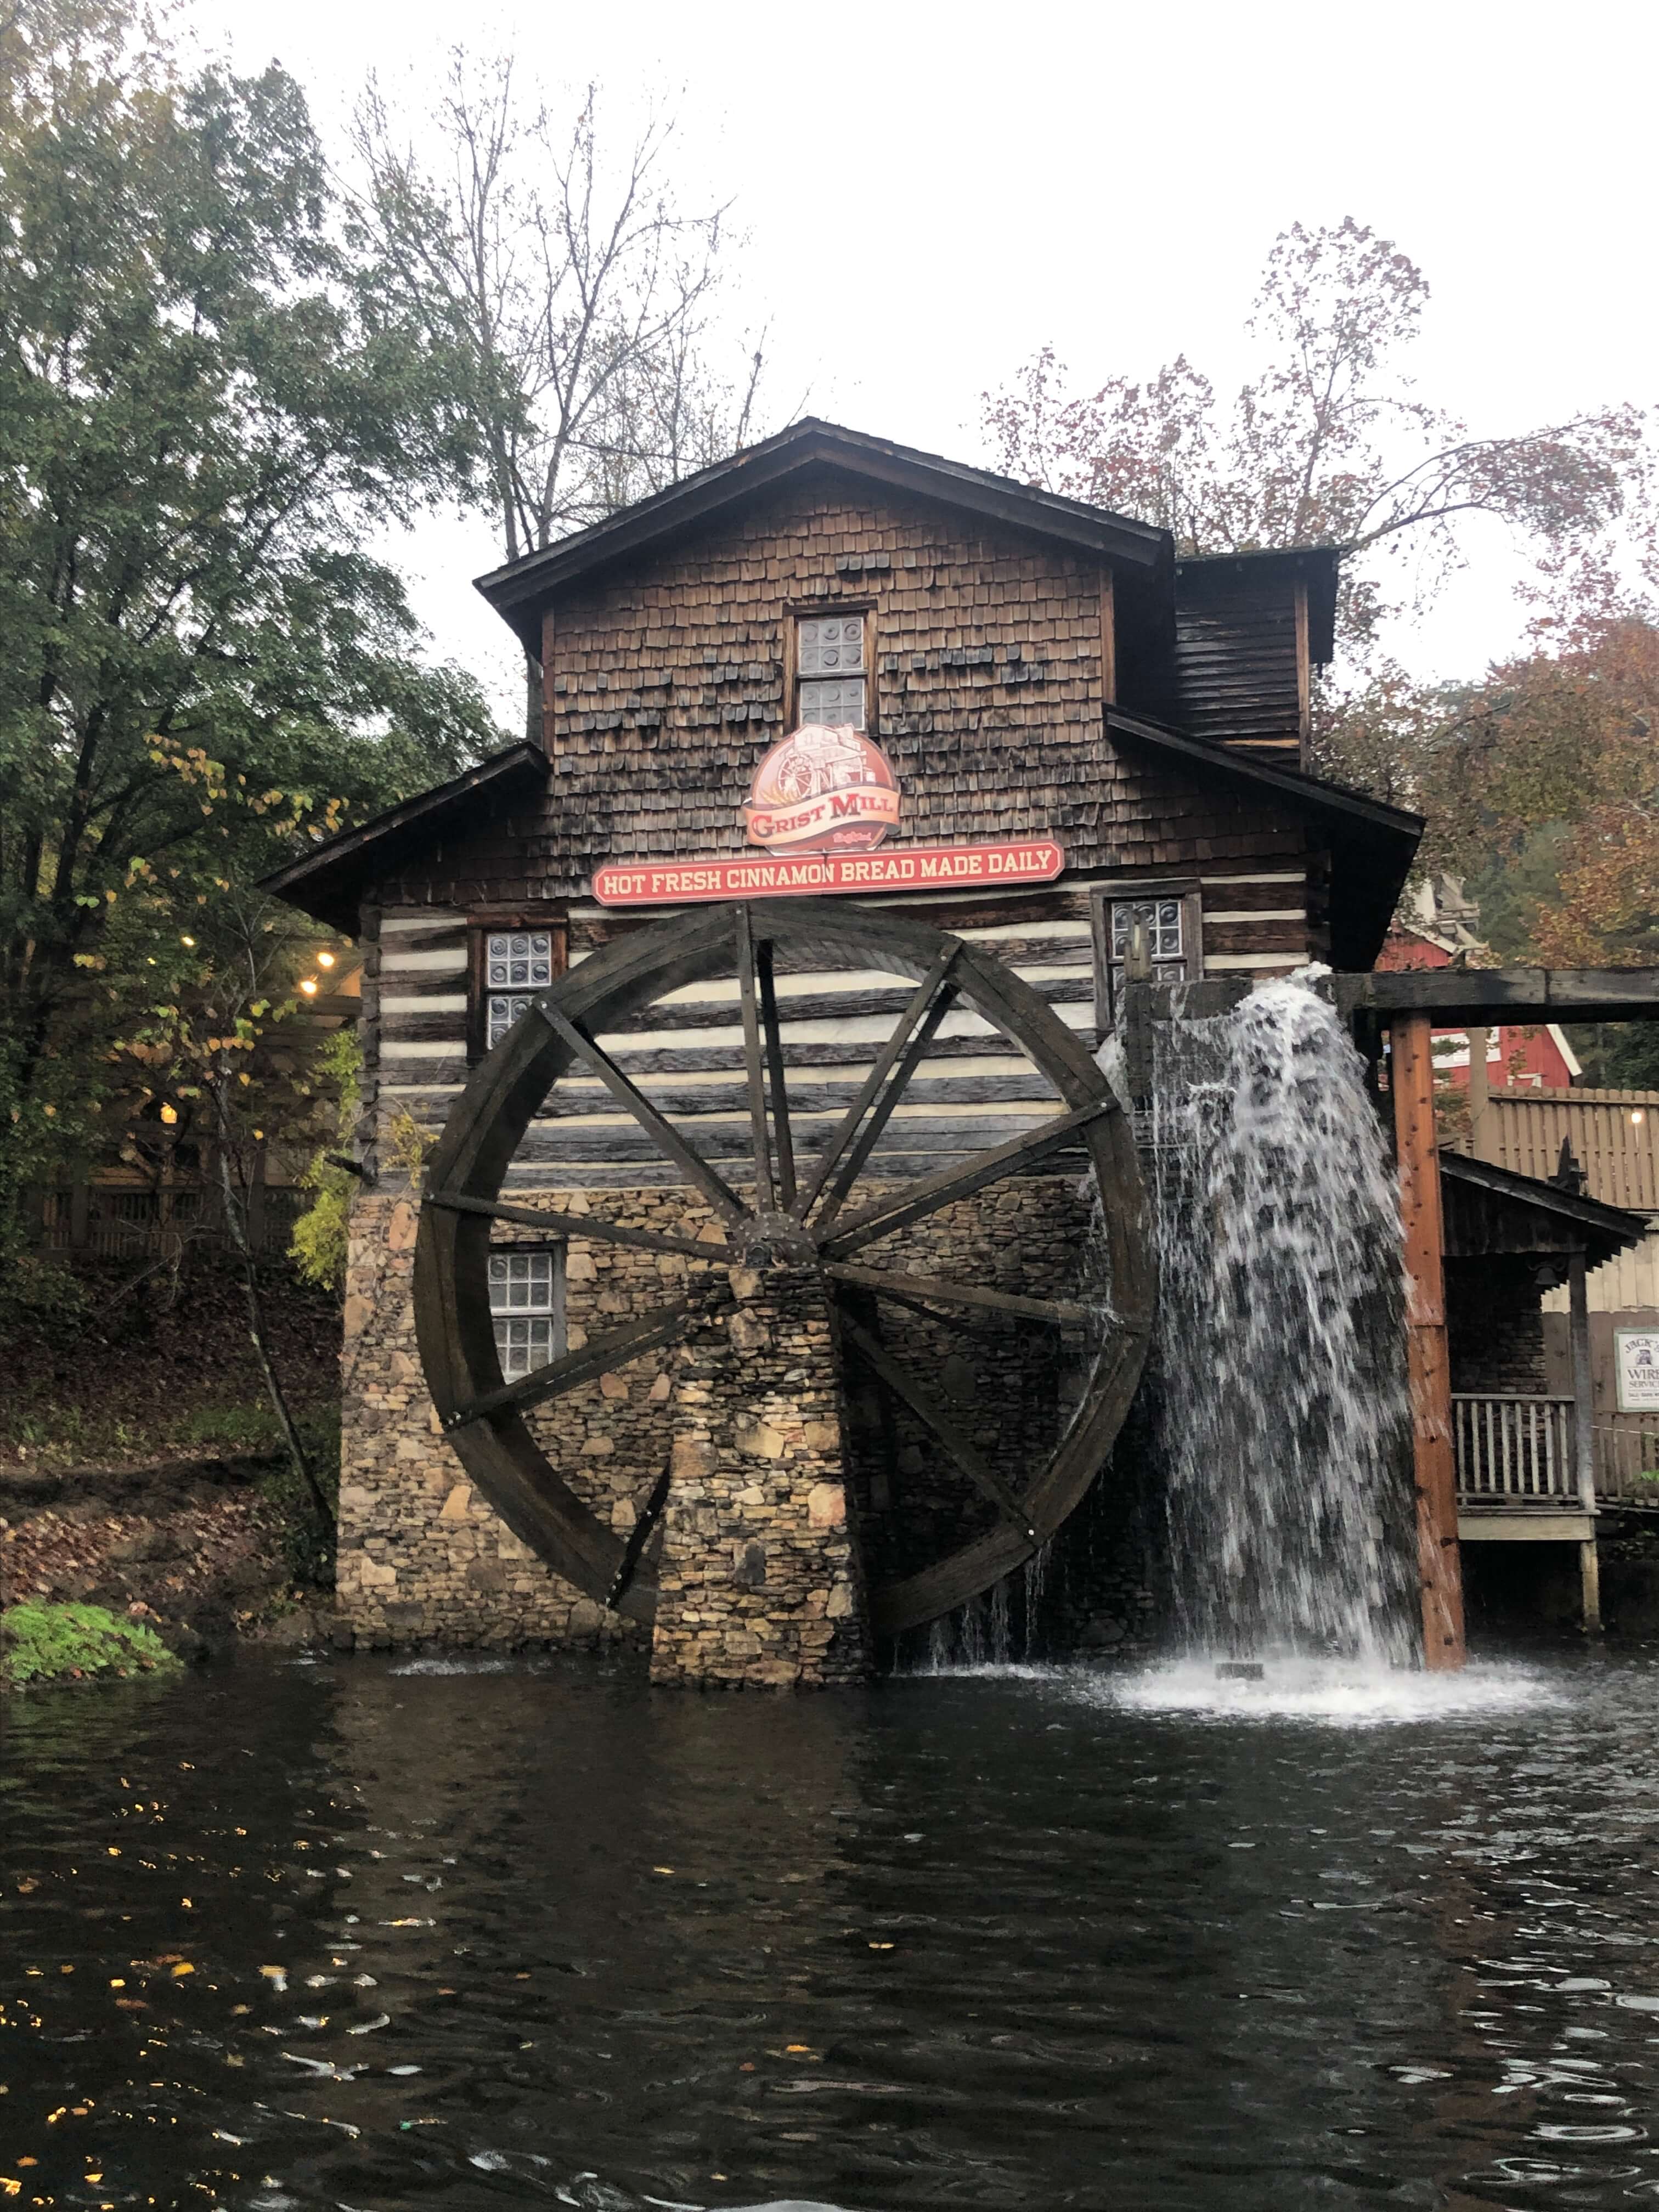 the Grist Mill at Dollywood has a giant water wheel and is home to hot, fresh cinnamon bread made daily